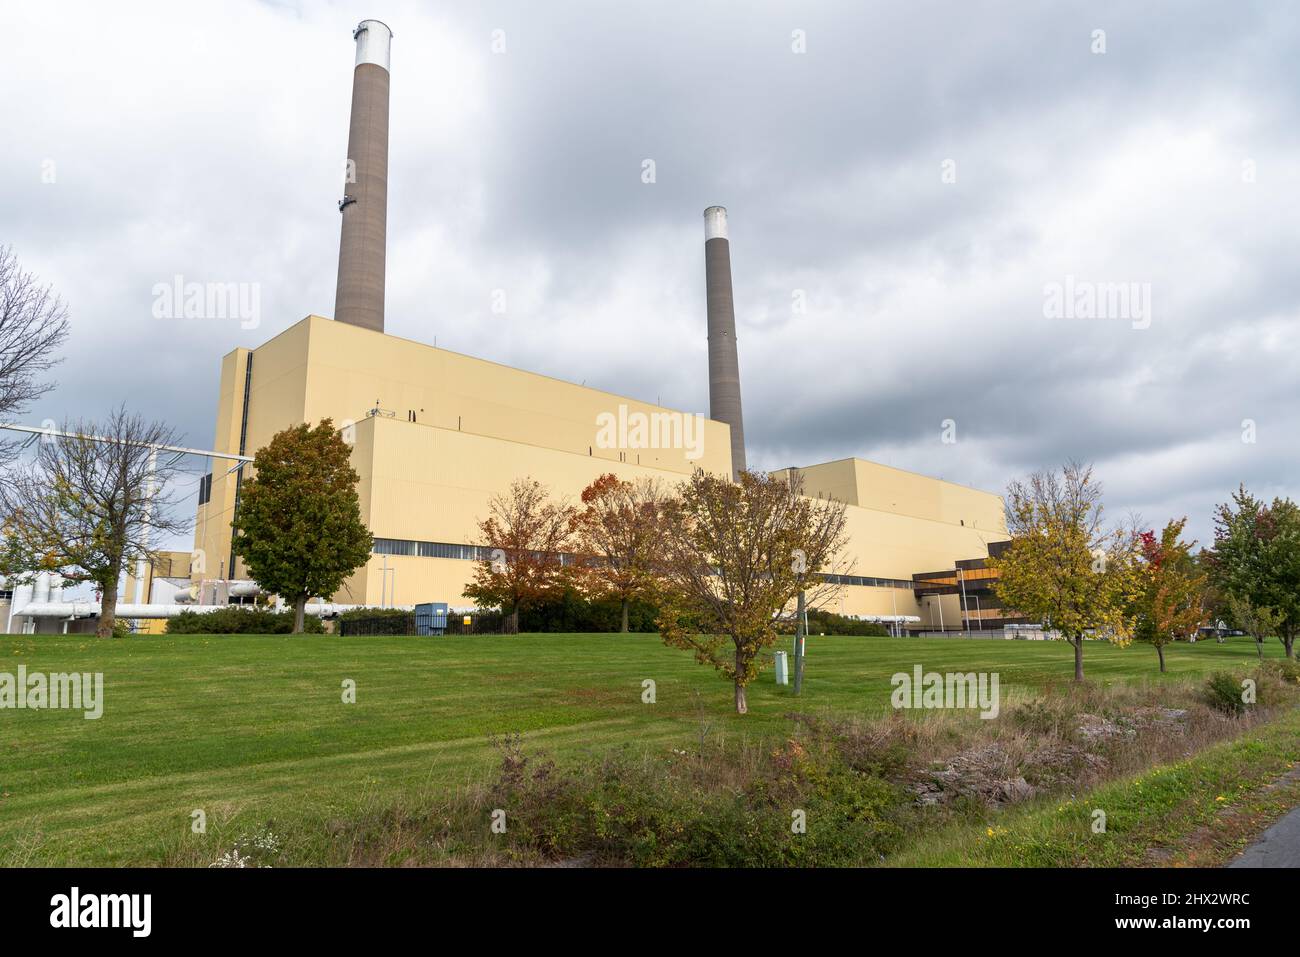 View of a gas-fired power plant with two tall chimneys under cloudy sky in autumn Stock Photo